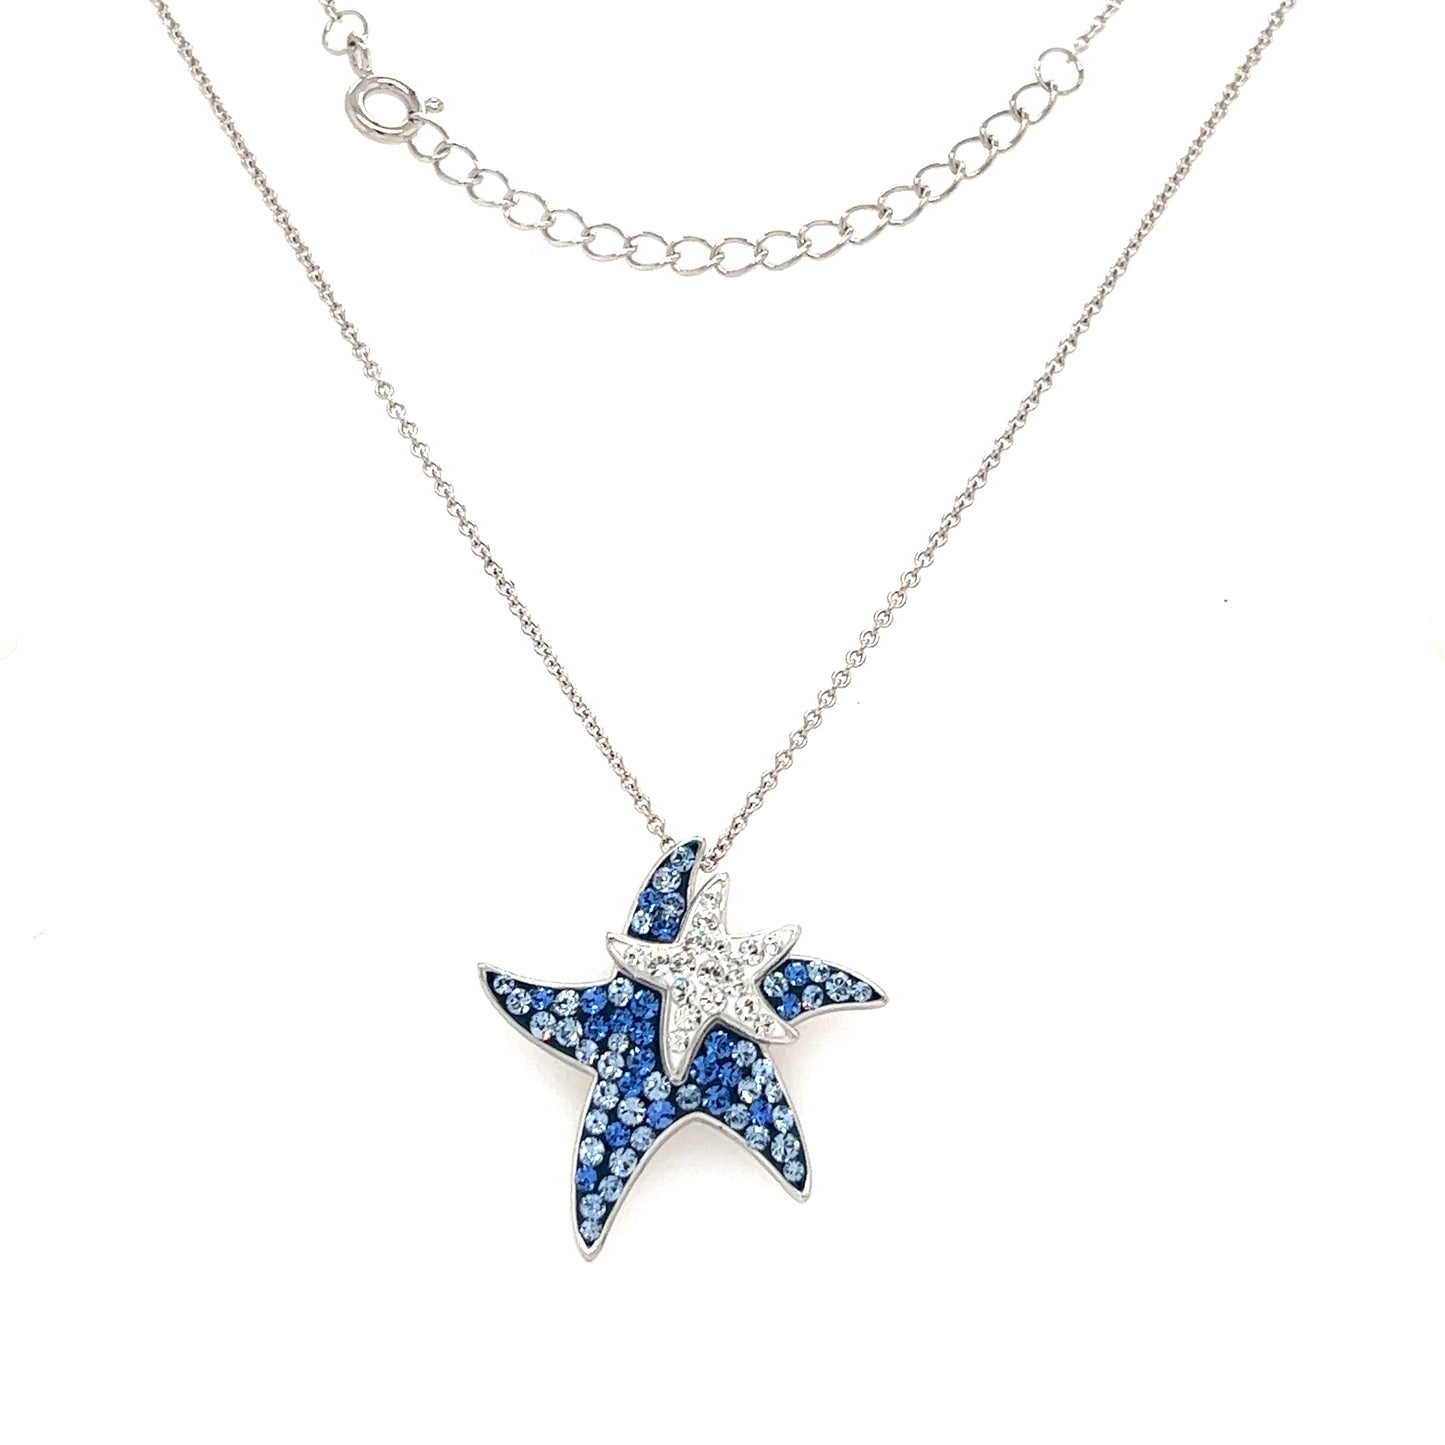 Blue Starfish Necklace with White and Blue Crystals in Sterling Silver. Full Necklace View